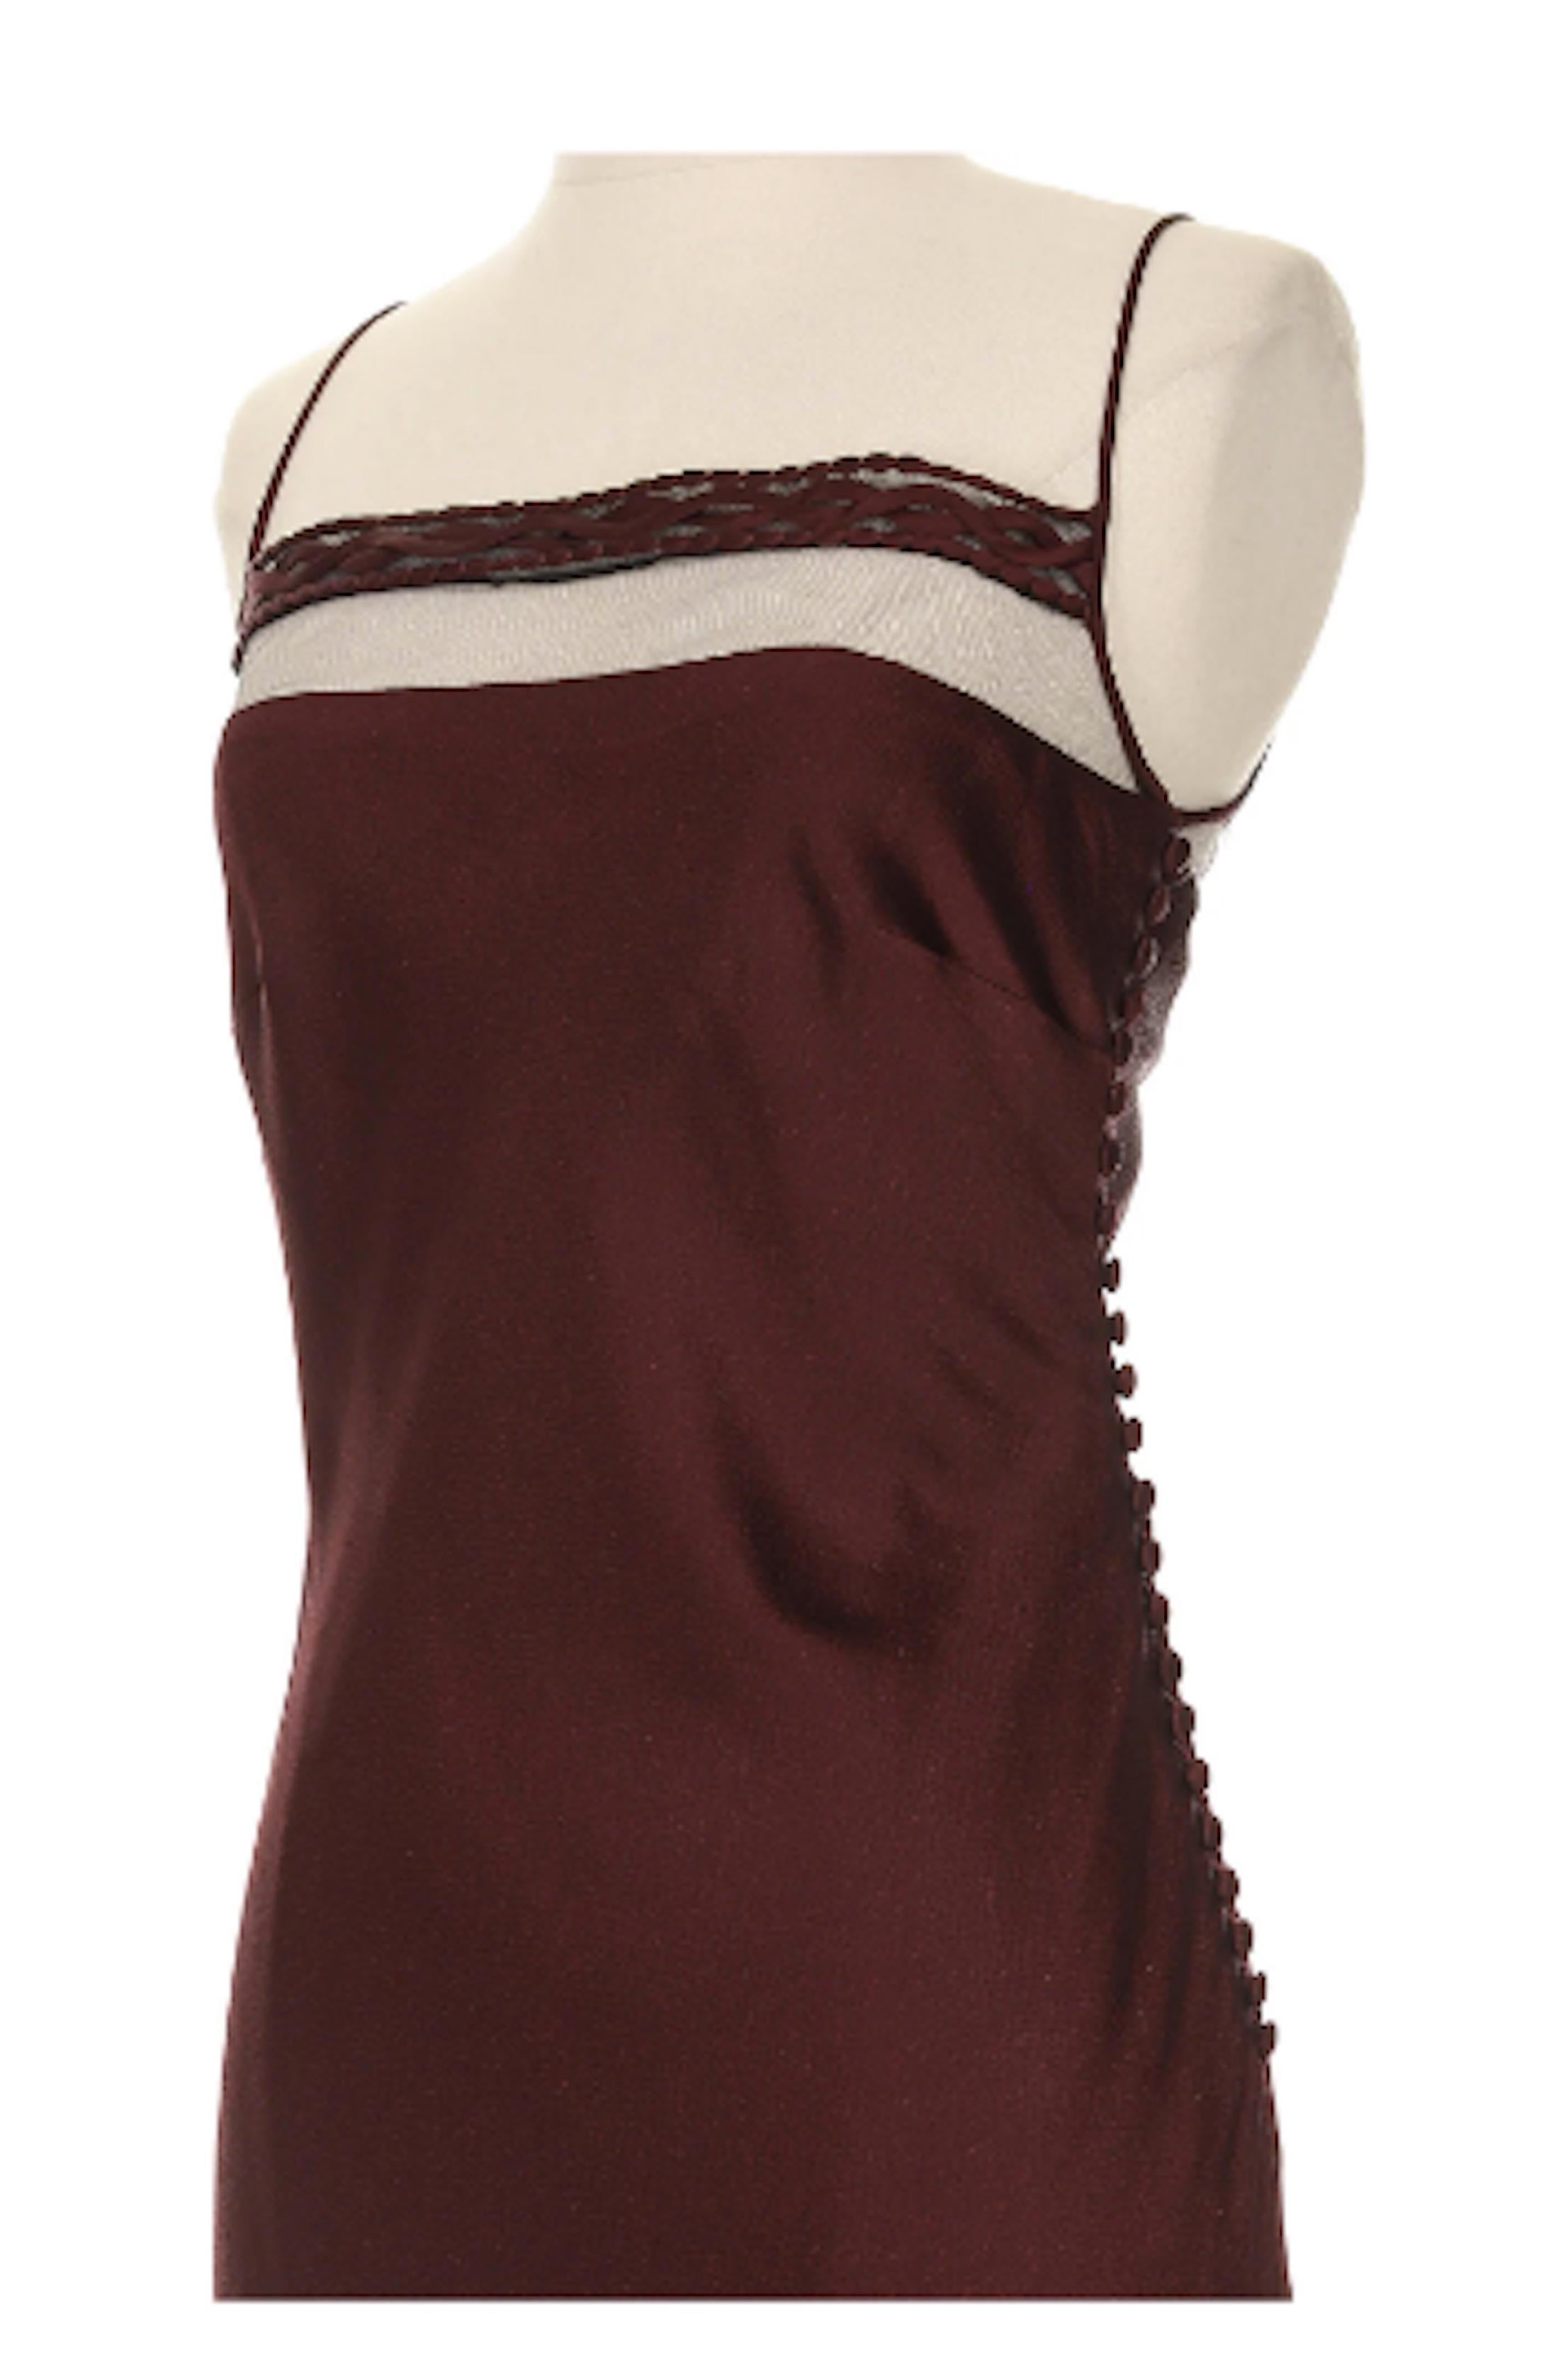 - Christian Dior by John Galliano Burgundy Silk Slip Dress. Likely from the 2000 collection.
Gorgeous burgundy colored spaghetti strap knee length dress with braided trip and mesh accents on the square neckline and peeping from the hem. Multi button